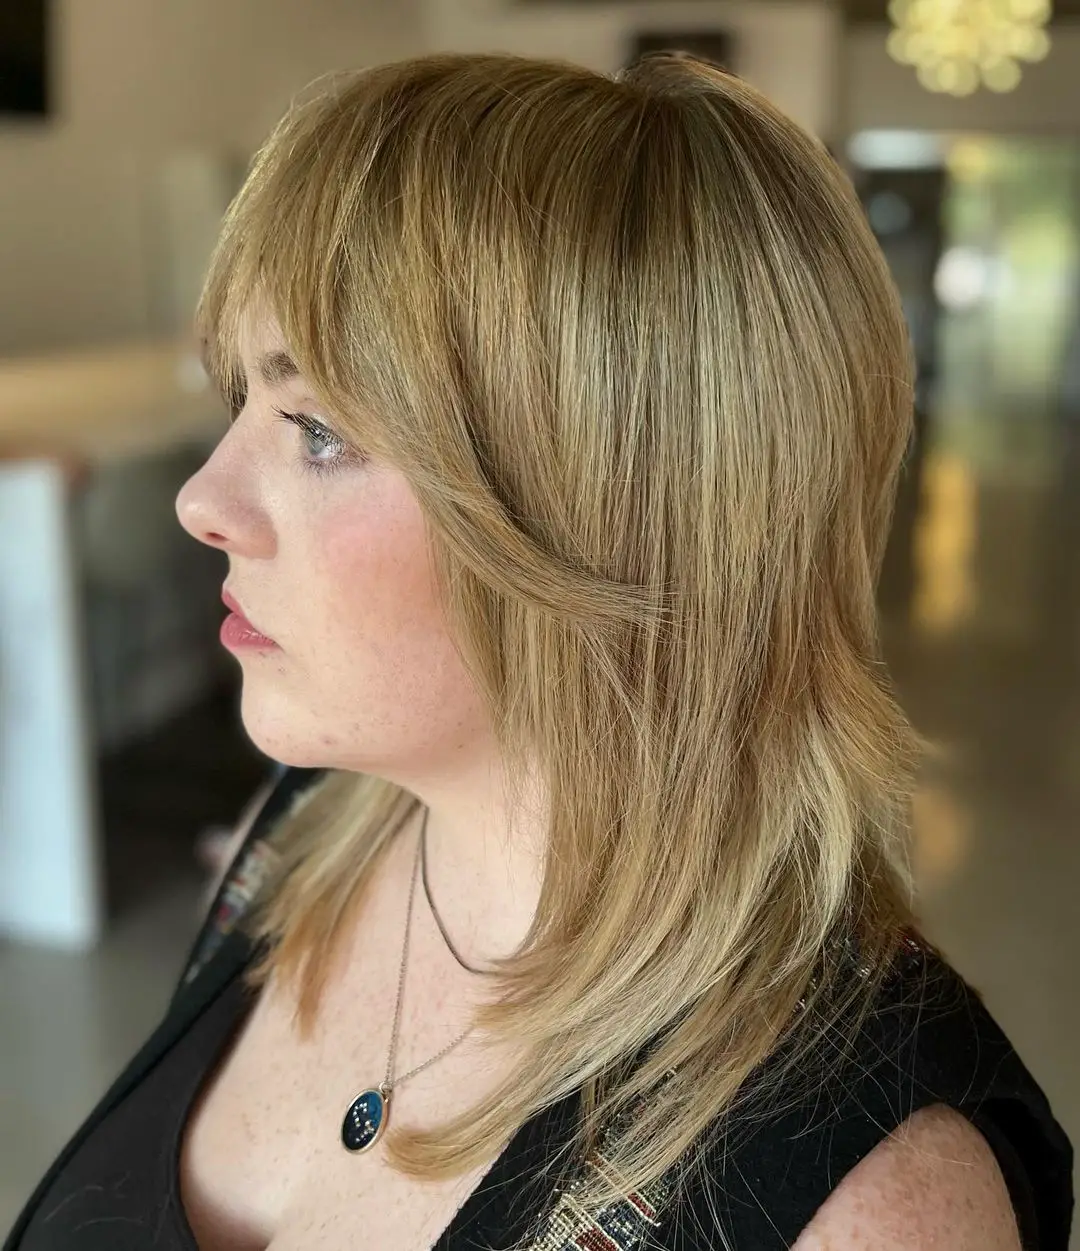 47-double-chin-and-038-round-face-hairstyles-for-women-that-are-slimming Medium Length Layered Cut for Fine Hair with Long Curtain Bangs